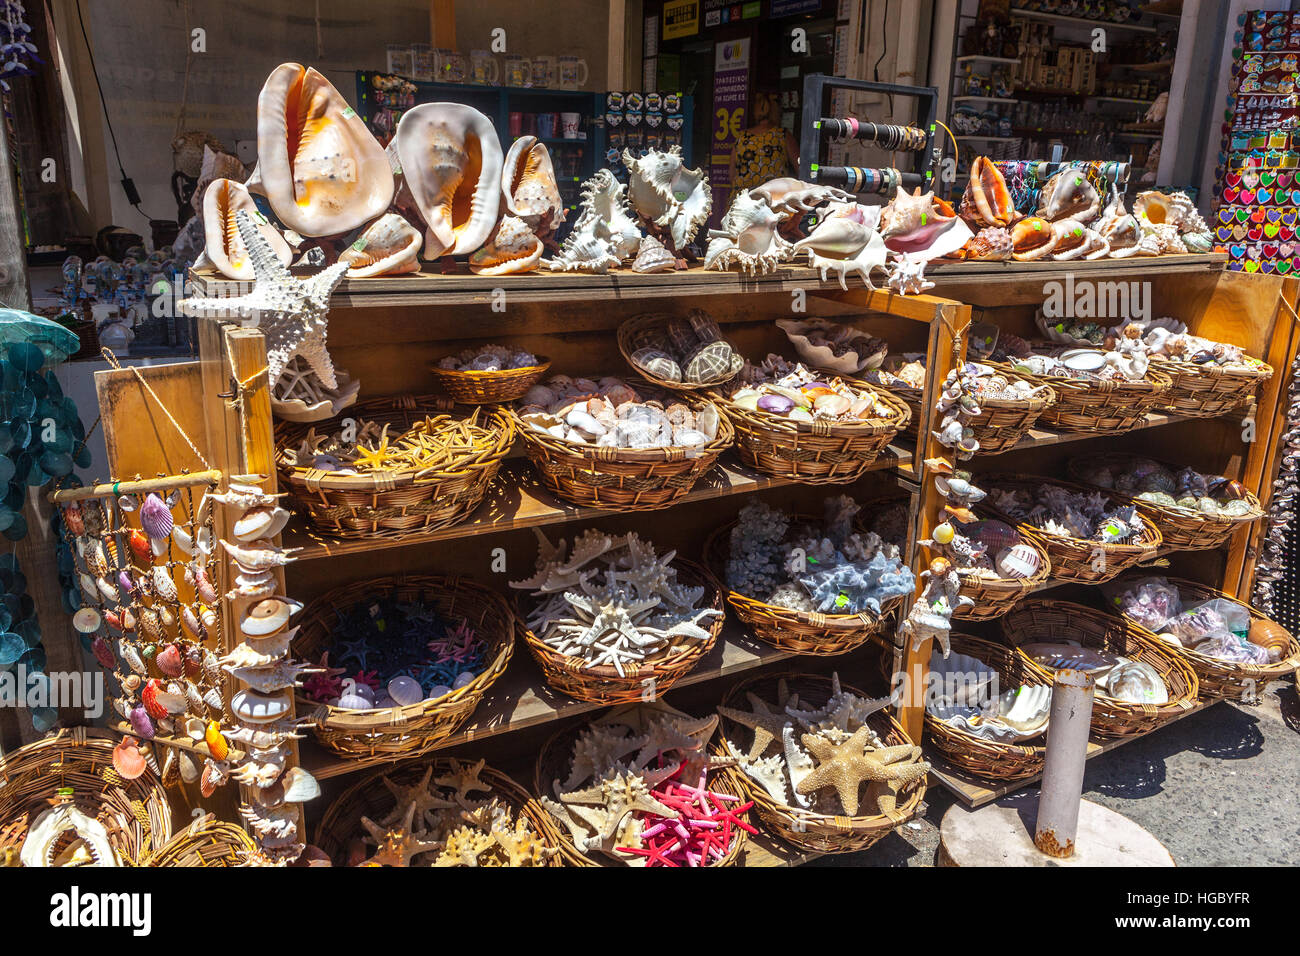 Souvenir stand in the old town offering products from the sea, Chania, Crete, Greece Stock Photo